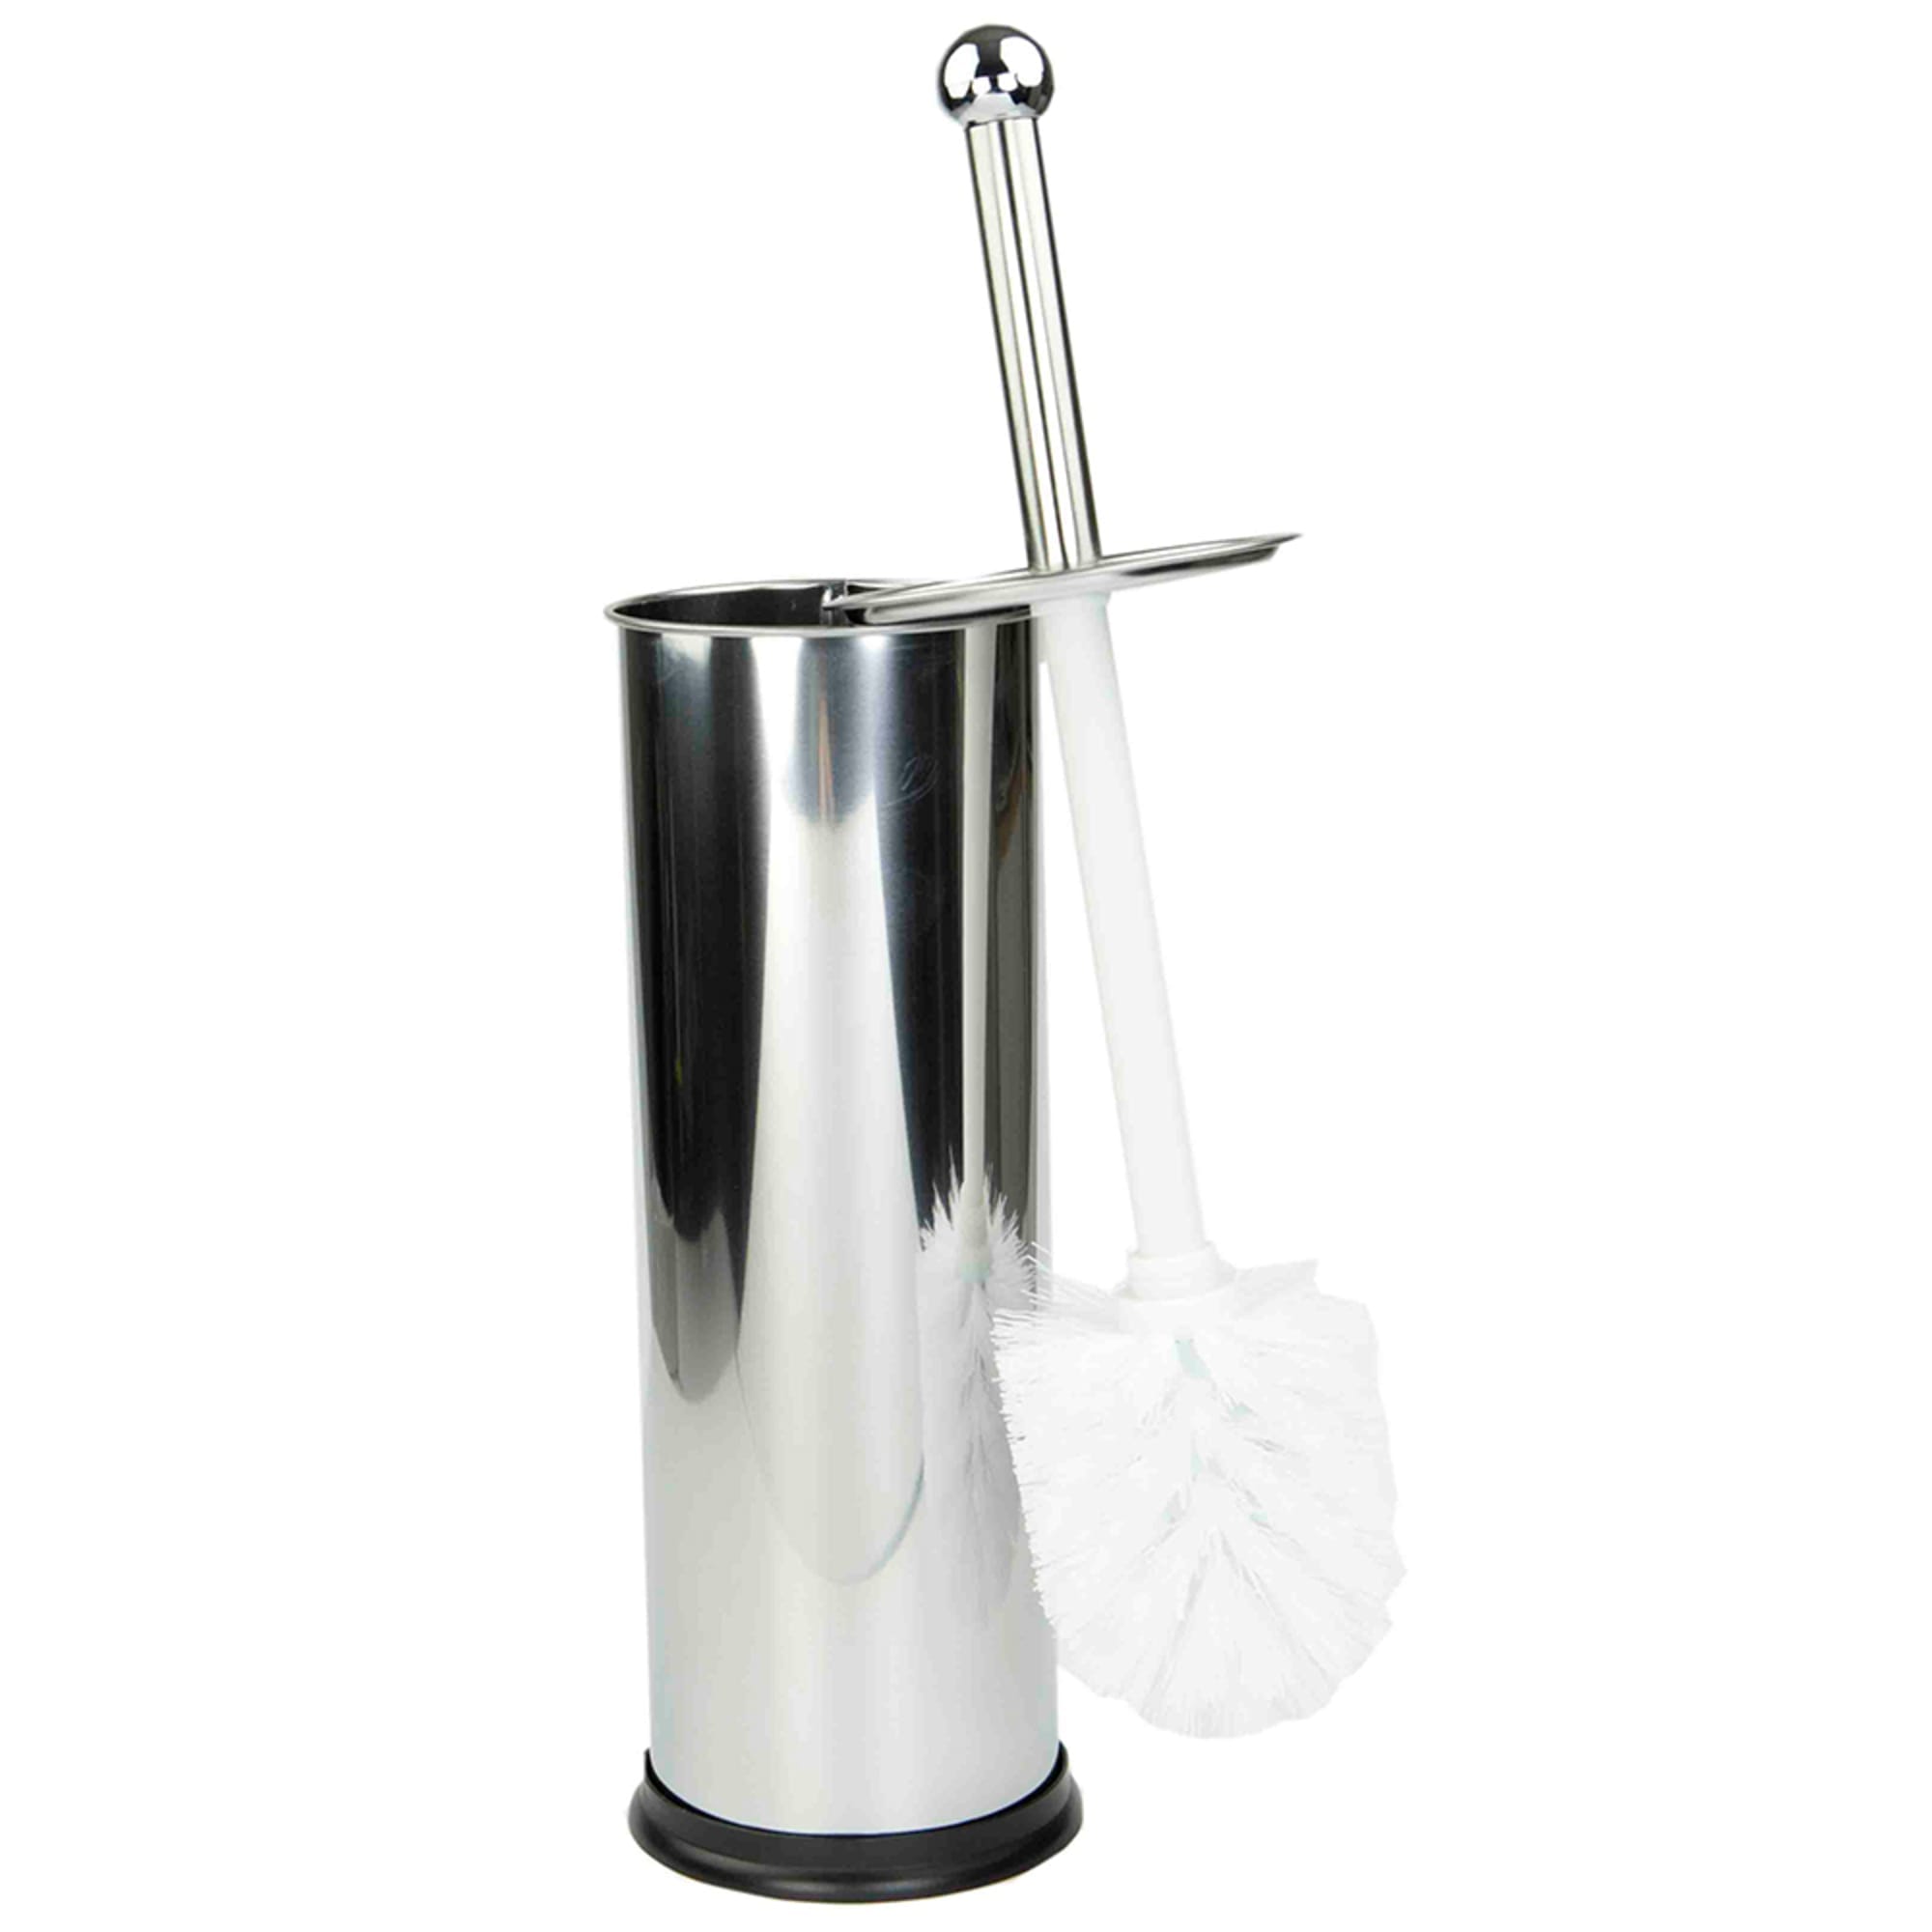 Home Basics Hide-Away and Splash Proof Polished Stainless Steel Toilet Brush with Non-Skid Hygienic Holder, Silver $6.00 EACH, CASE PACK OF 12